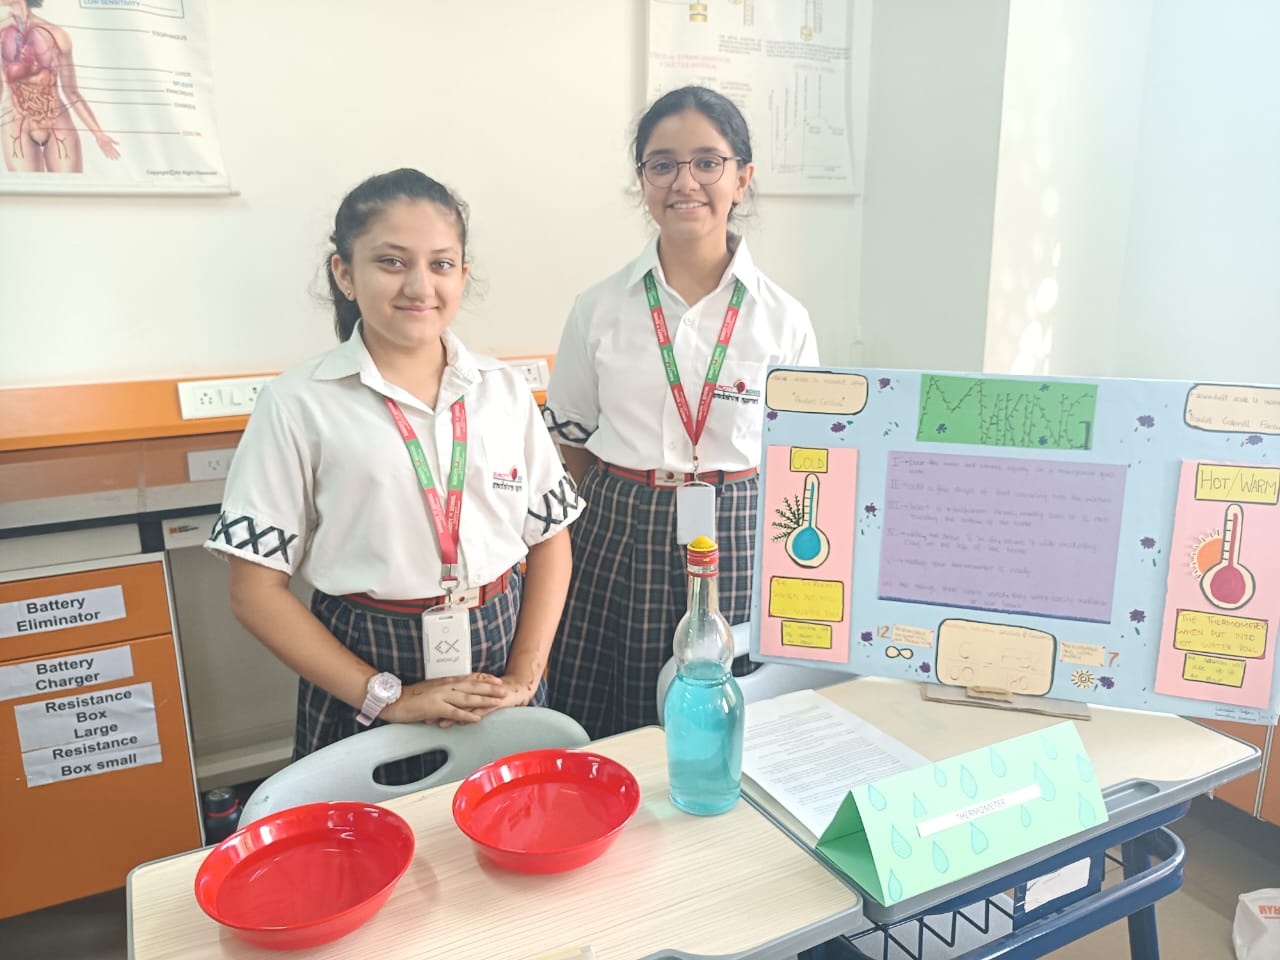 The Science Exhibition